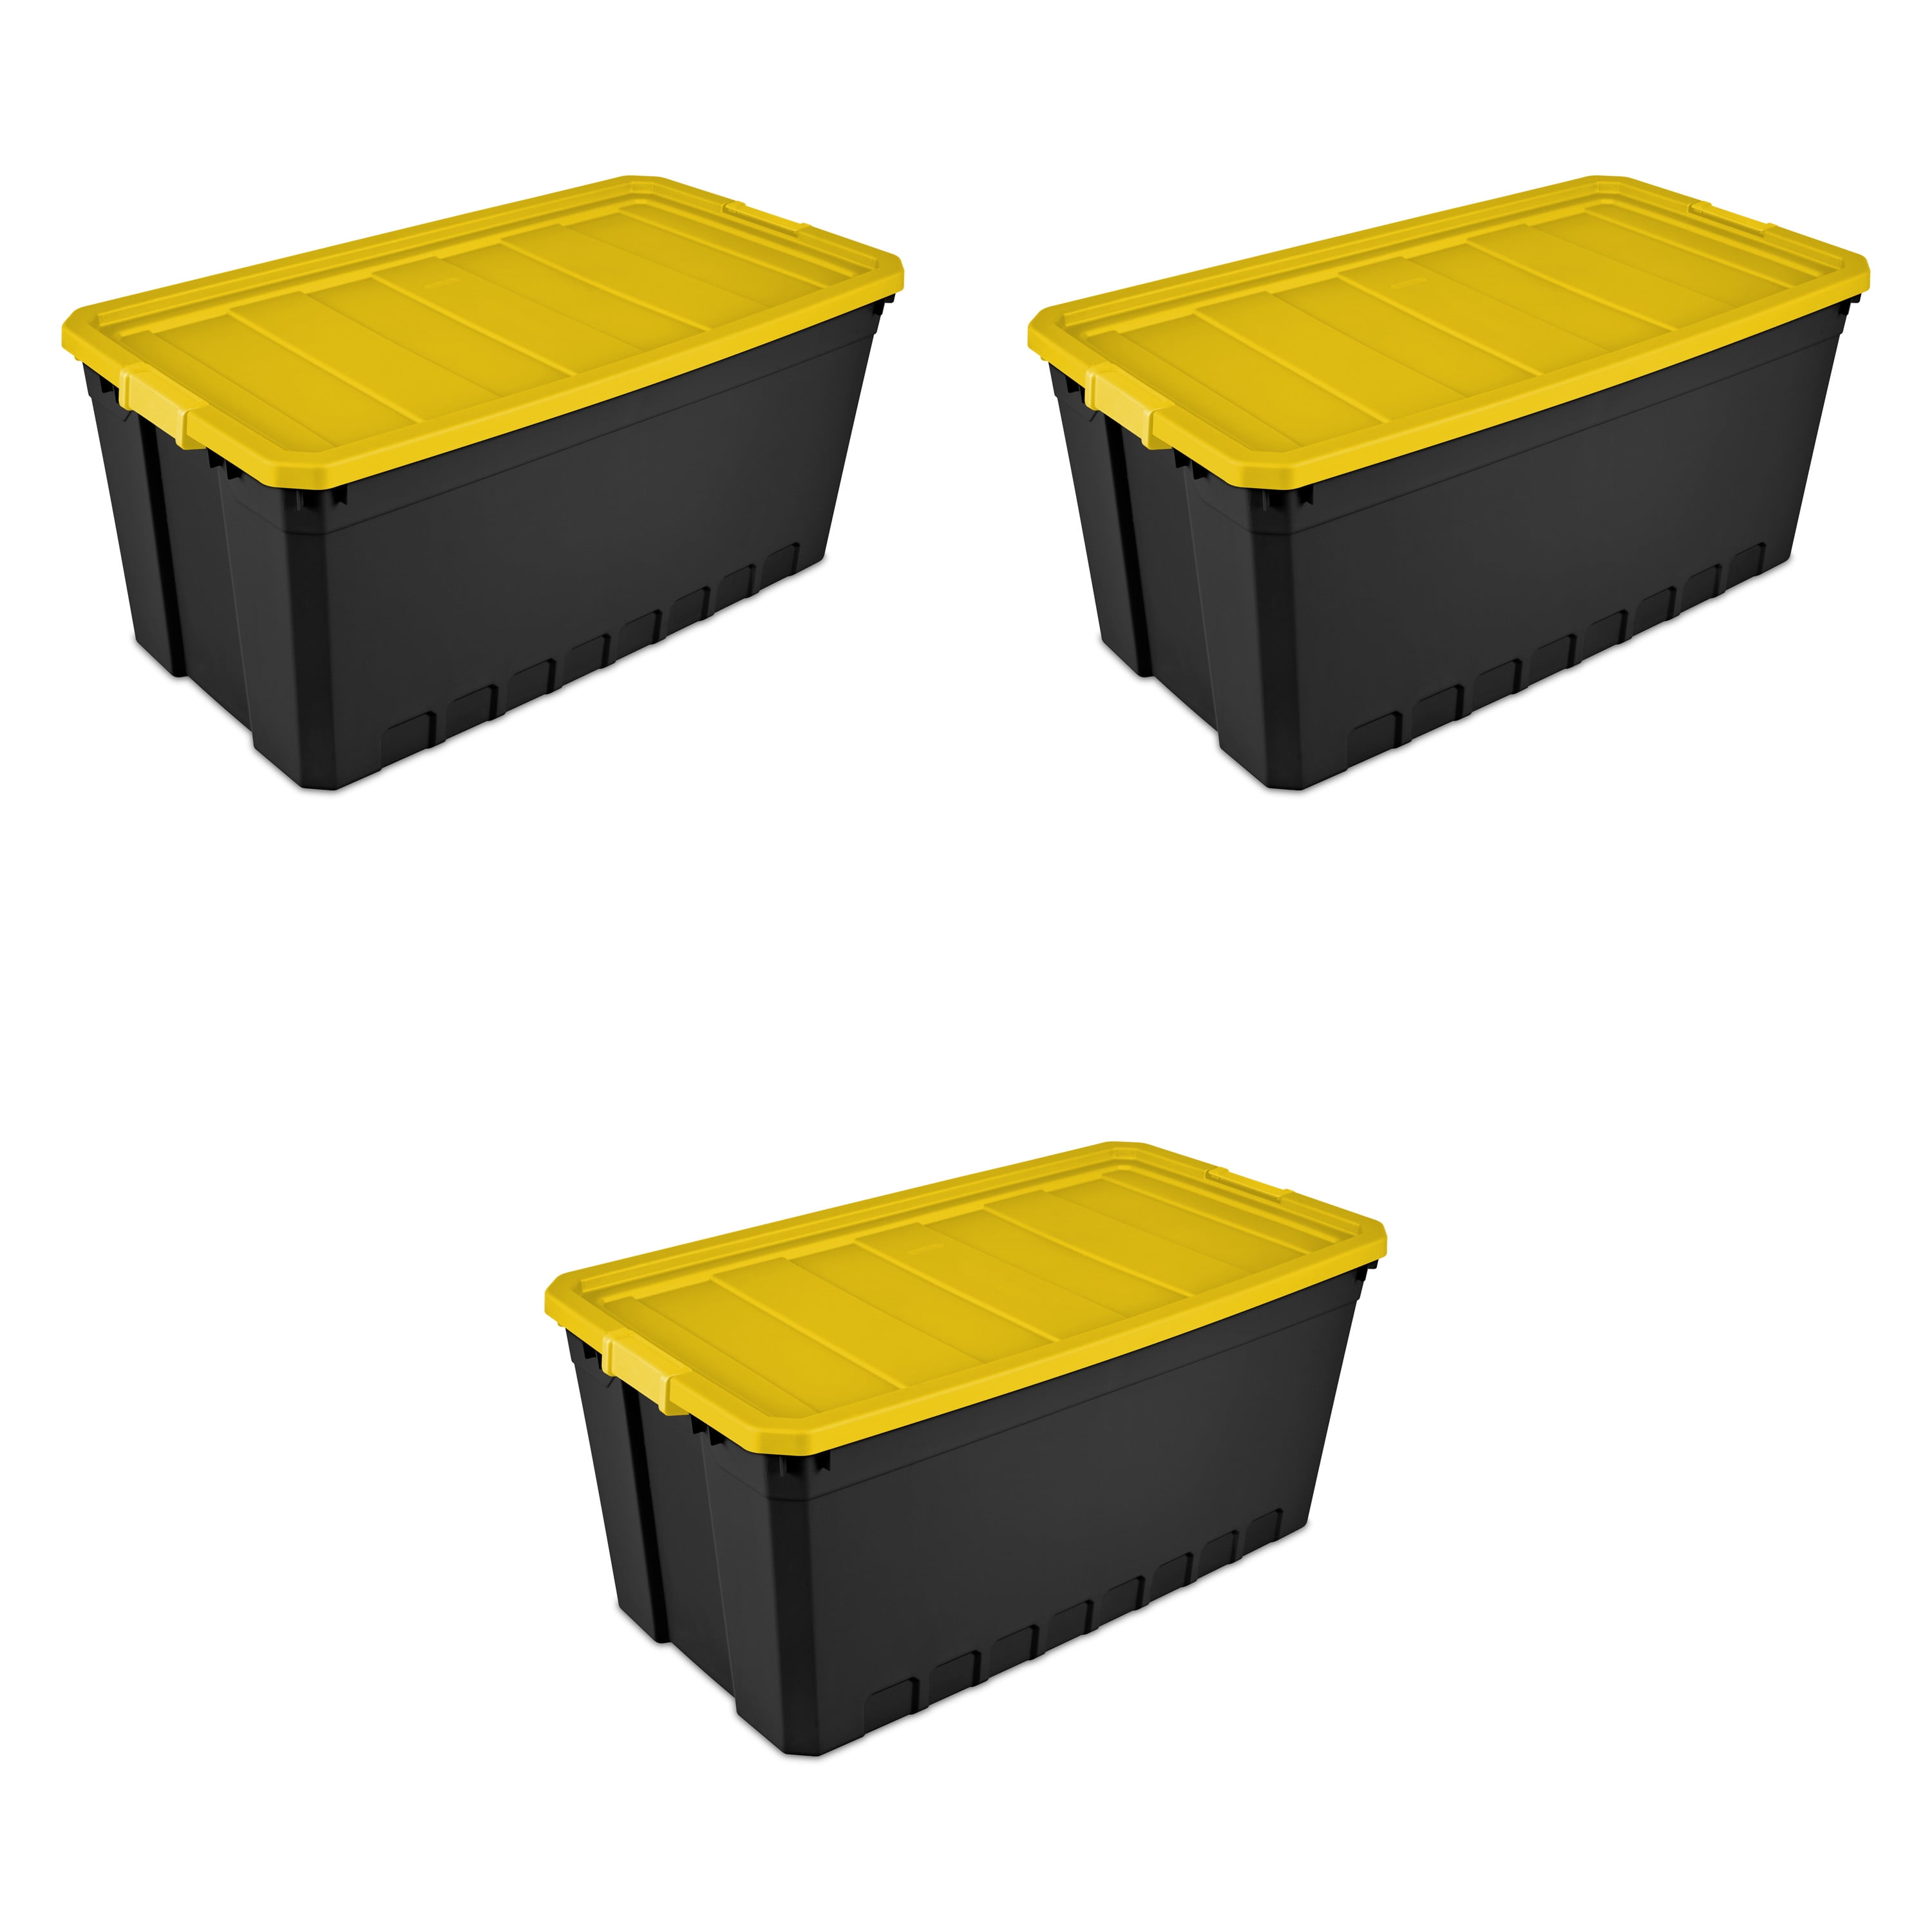 40 Gallon Rolling Plastic Storage Boxes Bins Totes Large Containers Case Of 2 